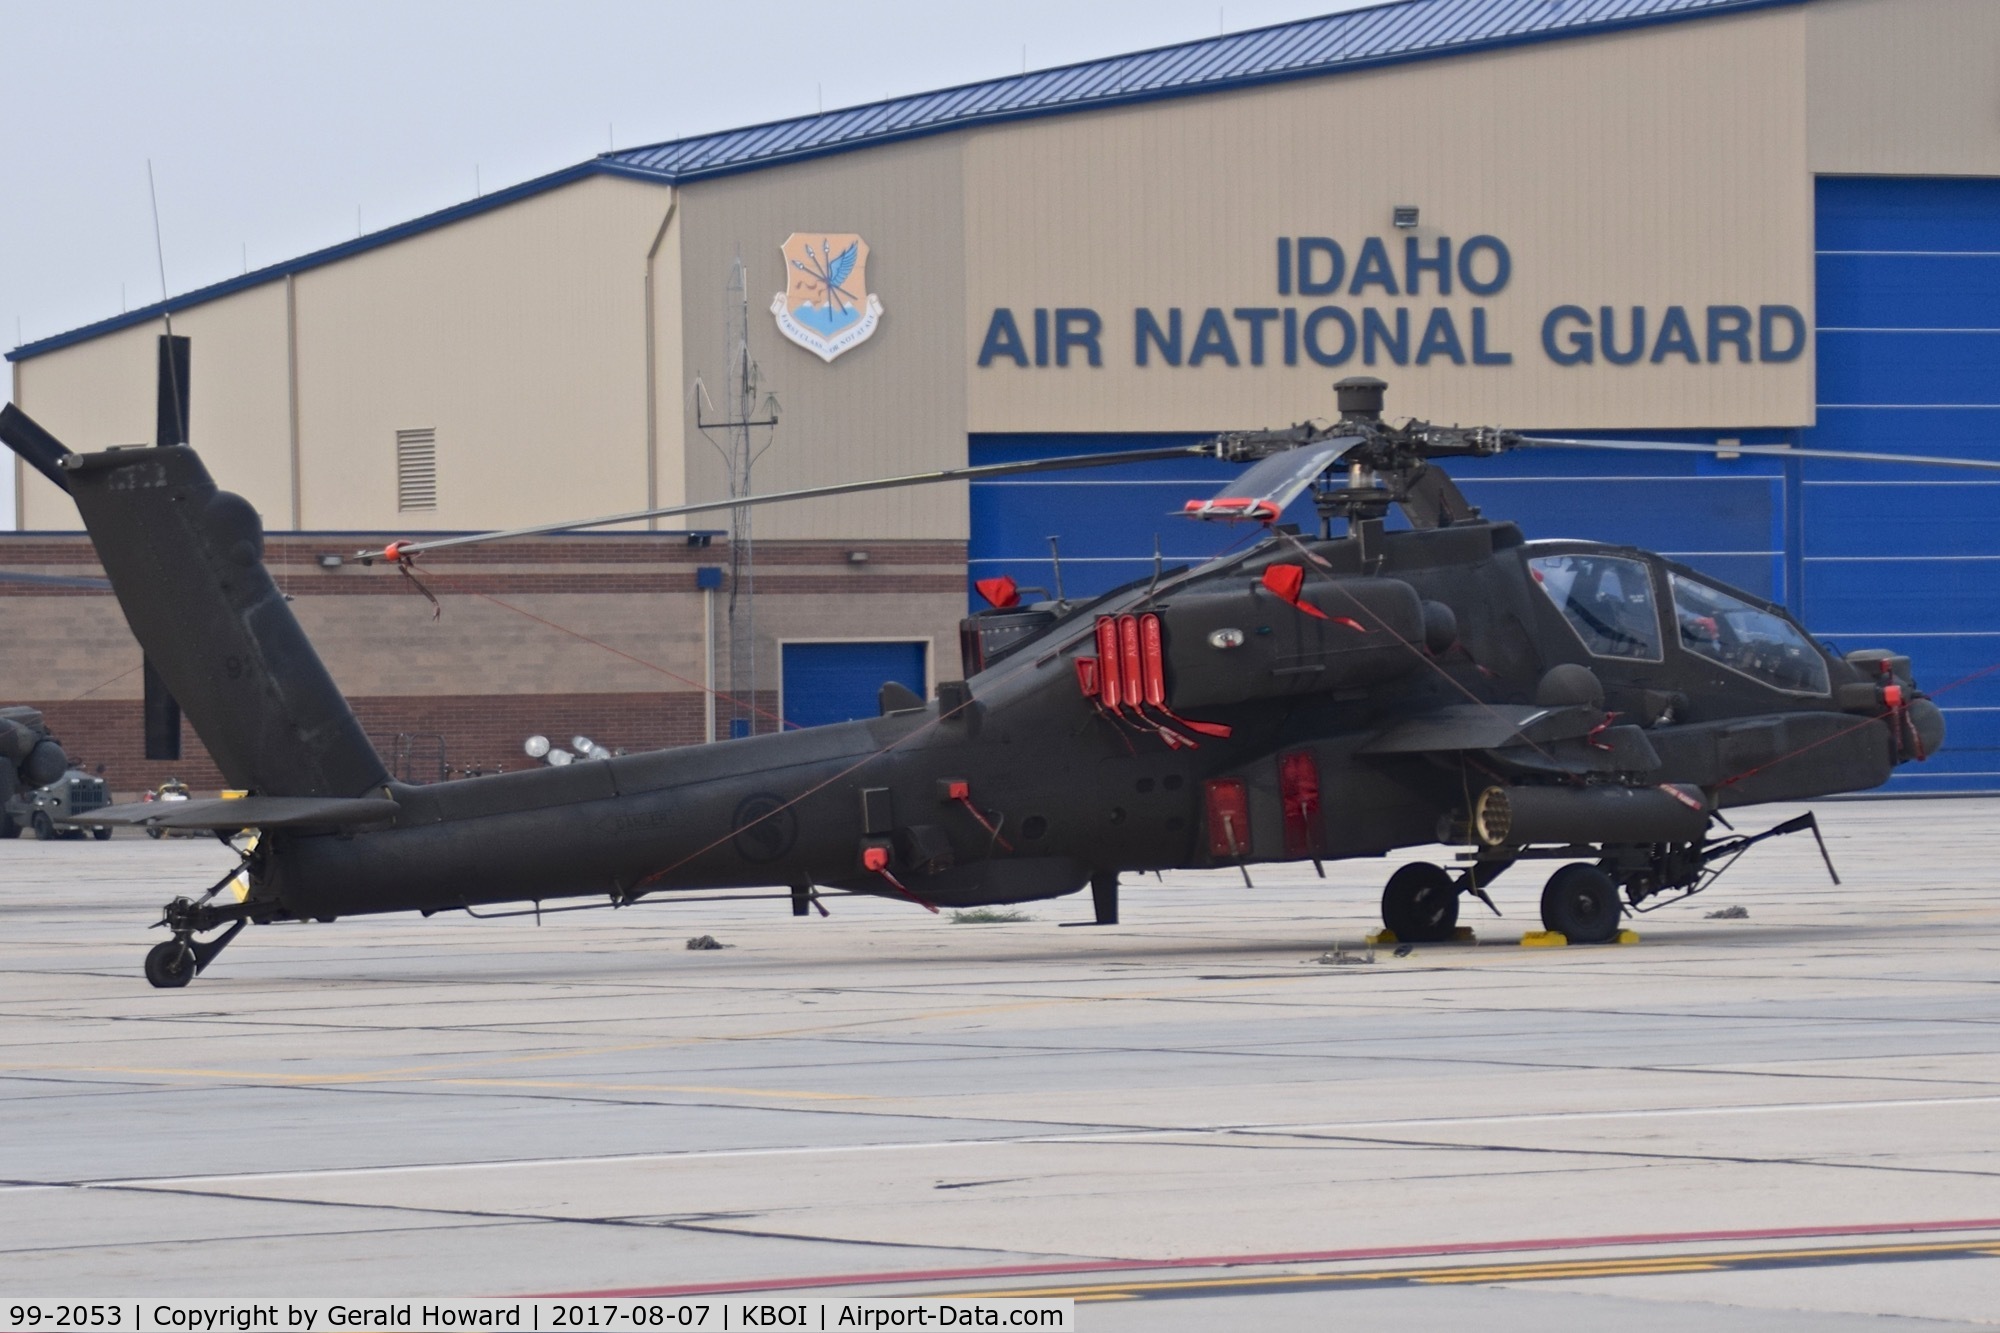 99-2053, 1999 Boeing AH-64D Apache C/N SN004, 201 Squadron, Royal Singapore Air Force parked on Idaho ANG ramp. Being trained by the 285th Aviation Regiment, Arizona Army Guard.